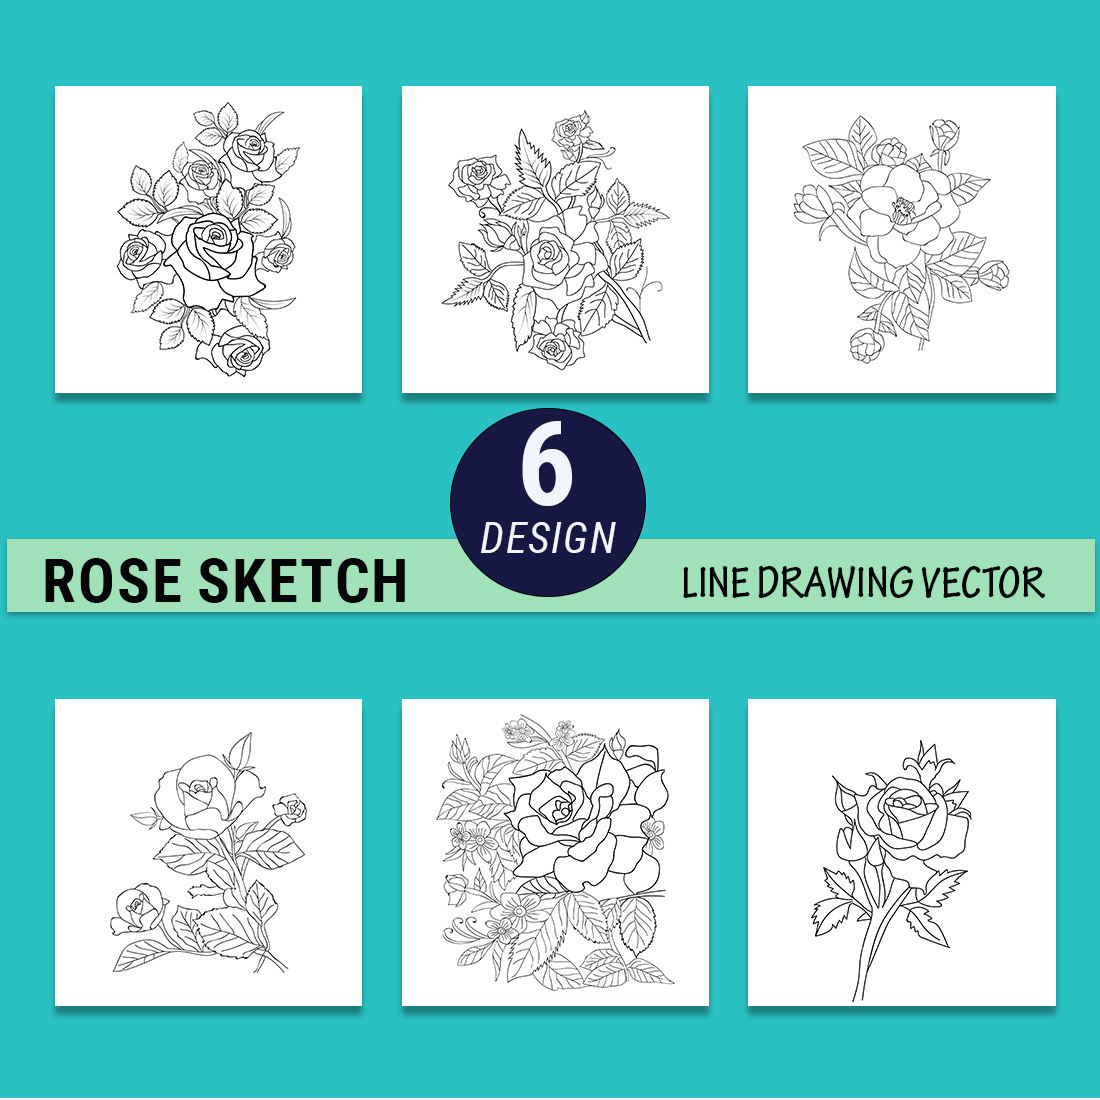 Premium Vector | A beautiful rose for coloring books or tattoo designs.